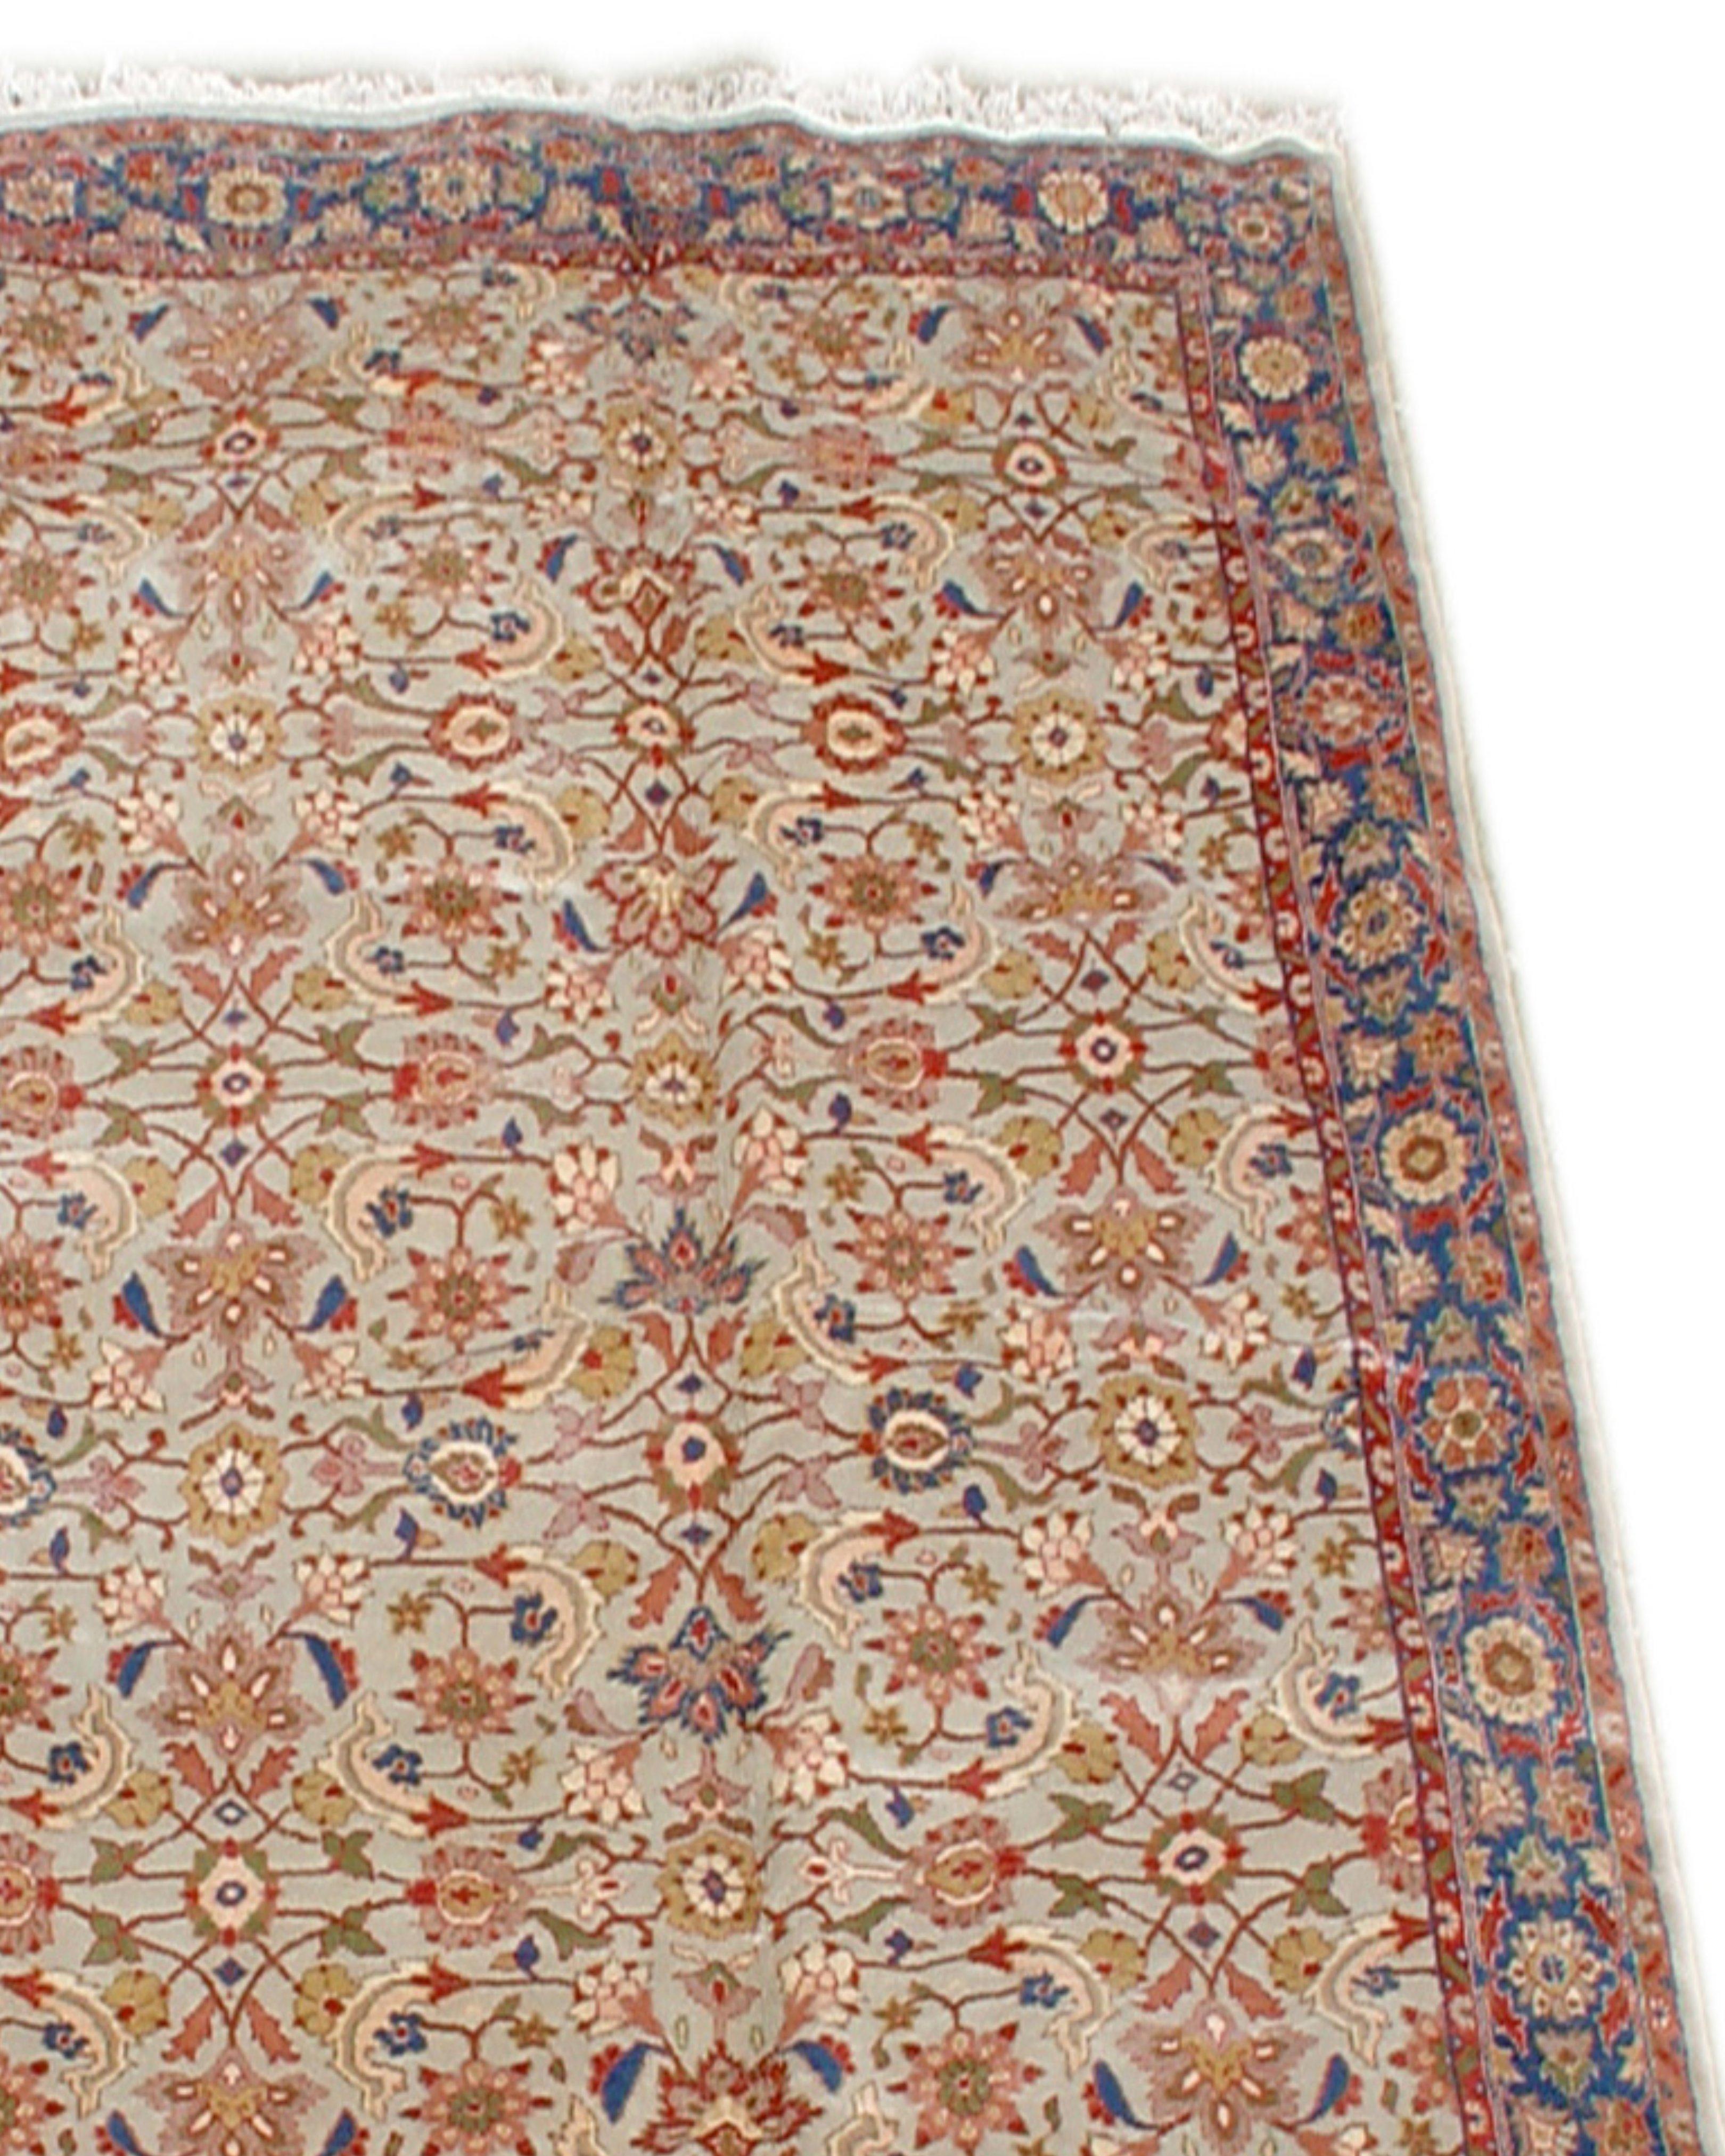 Antique Indo-Sultanabad Carpet, Late 20th Century

Additional Information:
Dimensions: 12'0